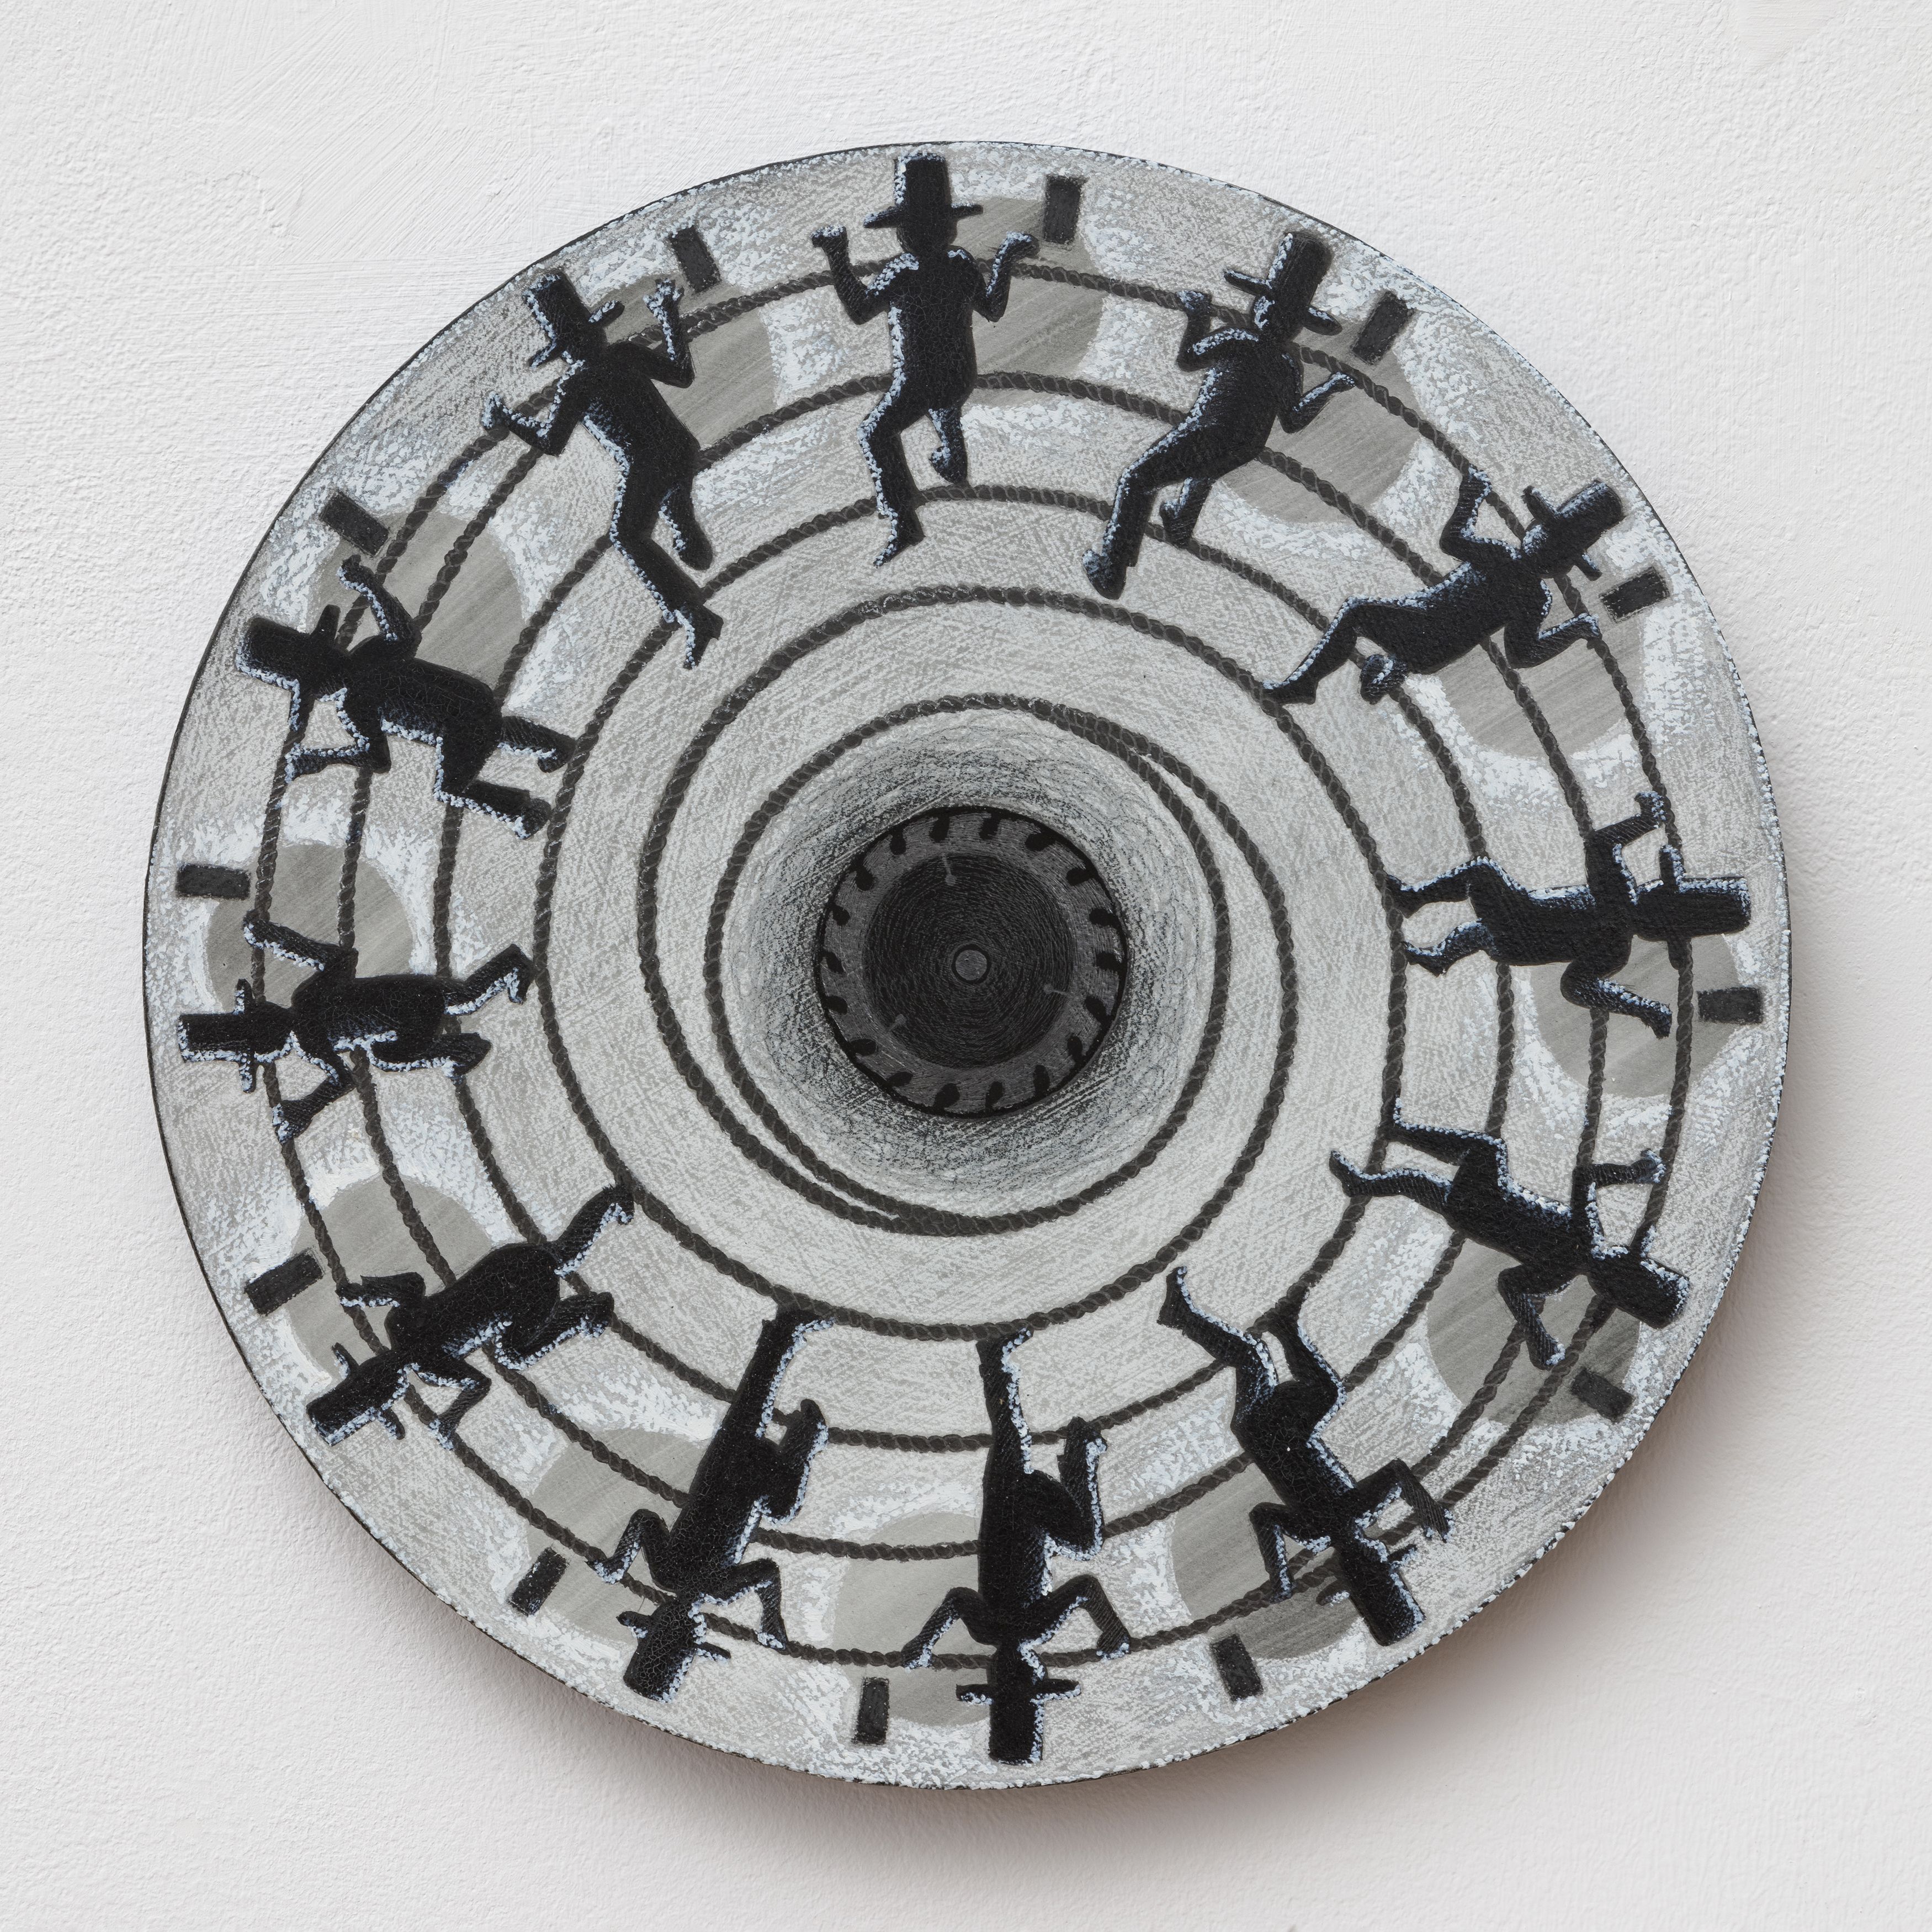 Cindy Ji Hye Kim, Reign of the Idle Hands #2, 2019, graphite, charcoal, pastel, ink, acrylic, and oil on birch wood, 12 in. (30.5 cm) diameter